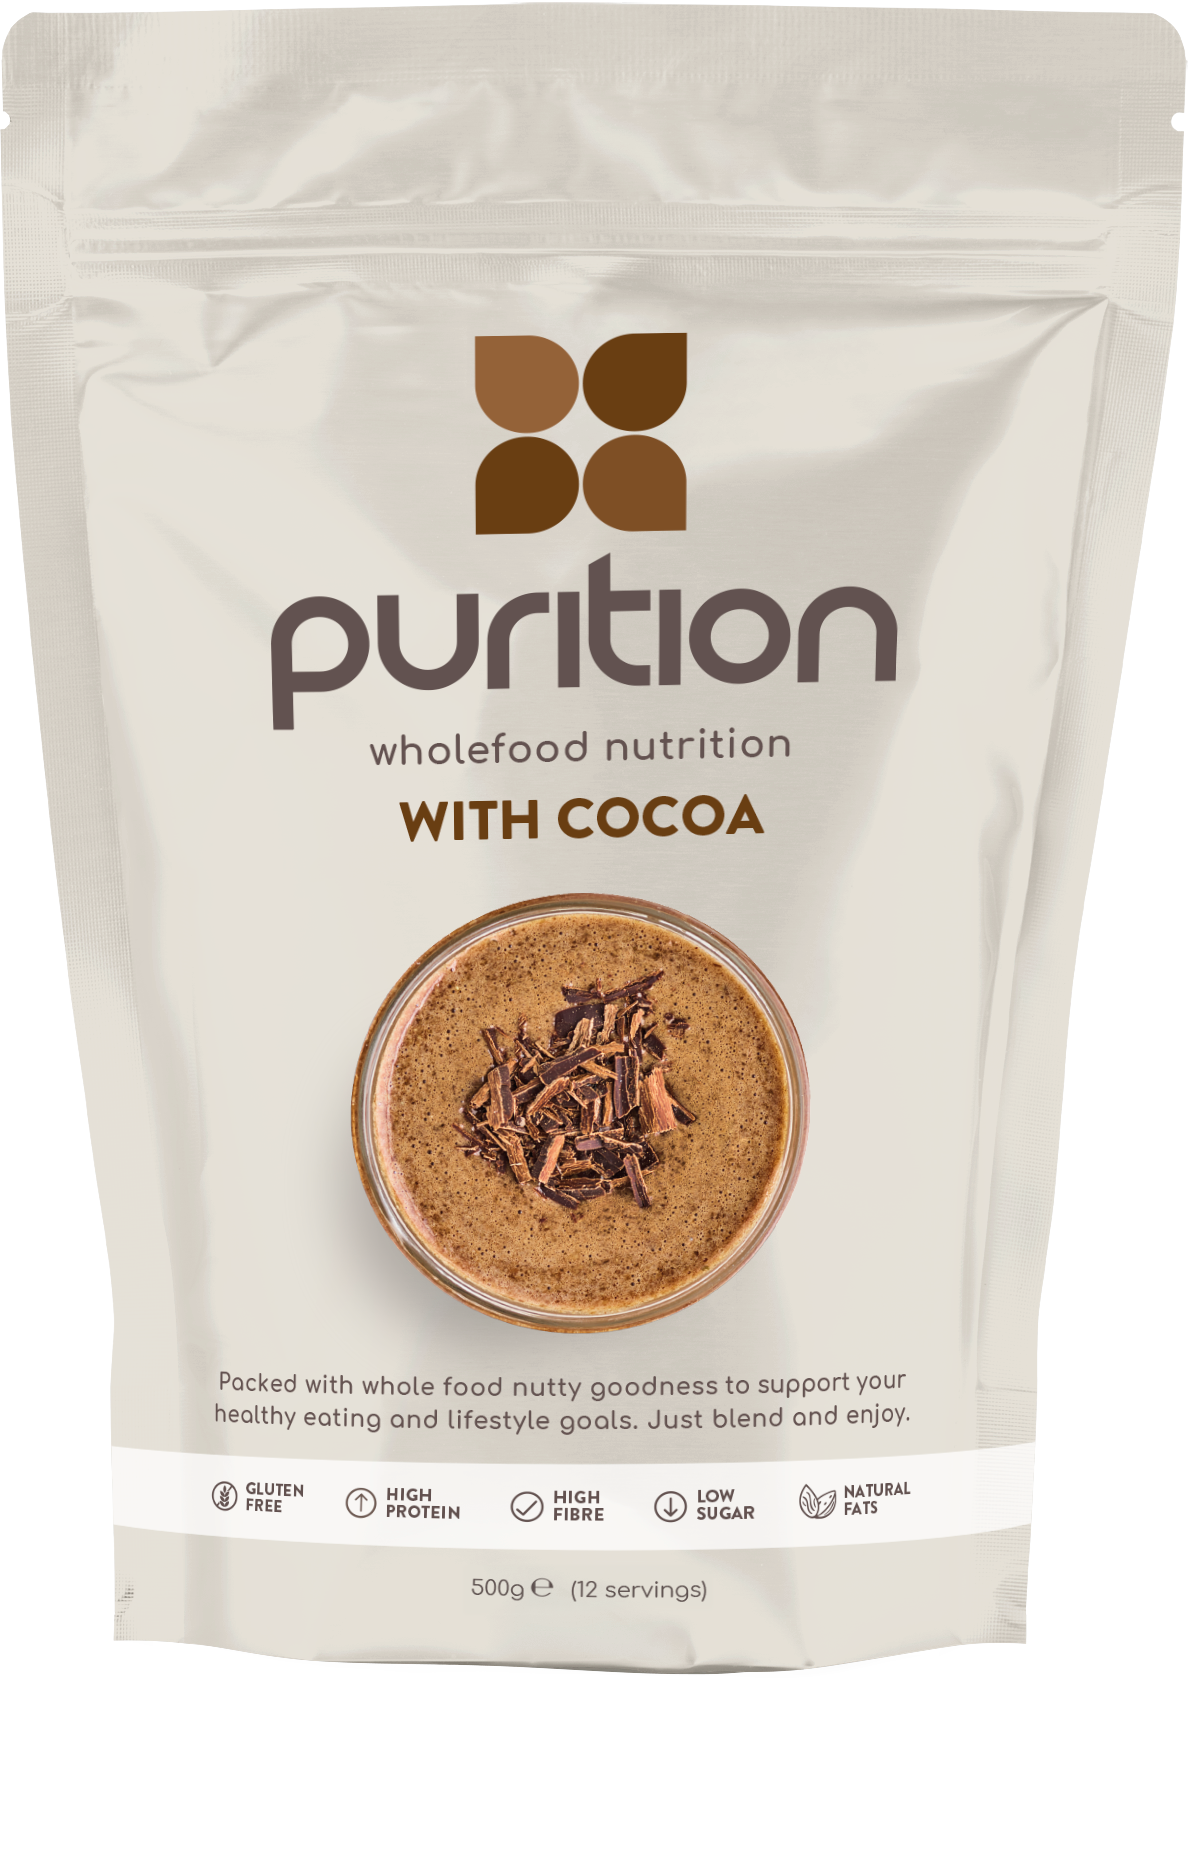 Purition Wholefood Nutrition With Cocoa